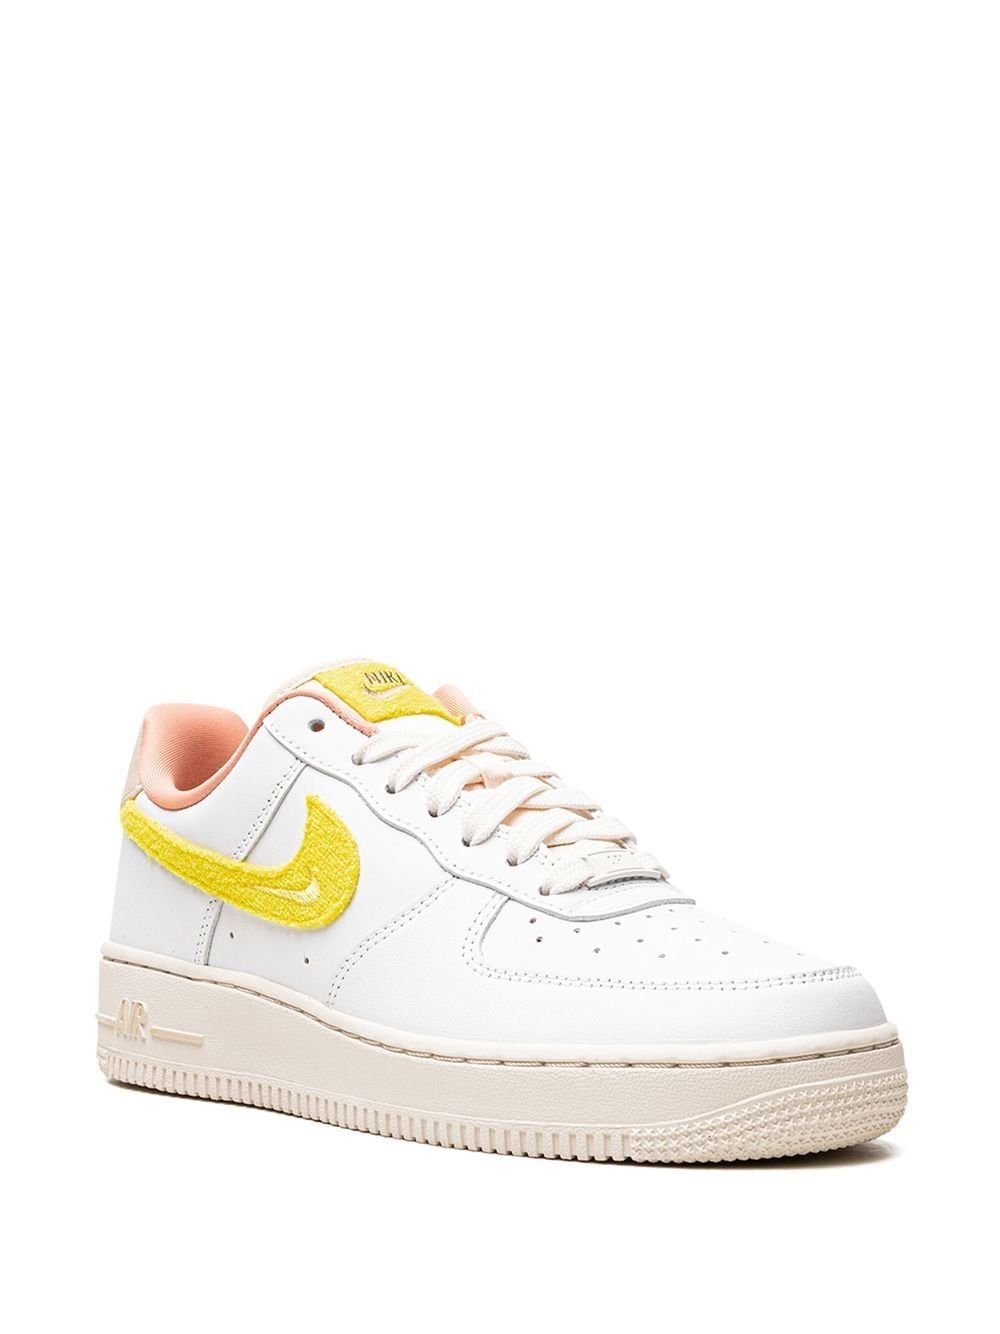 AIR FORCE 1 '07 LX SNEAKERS